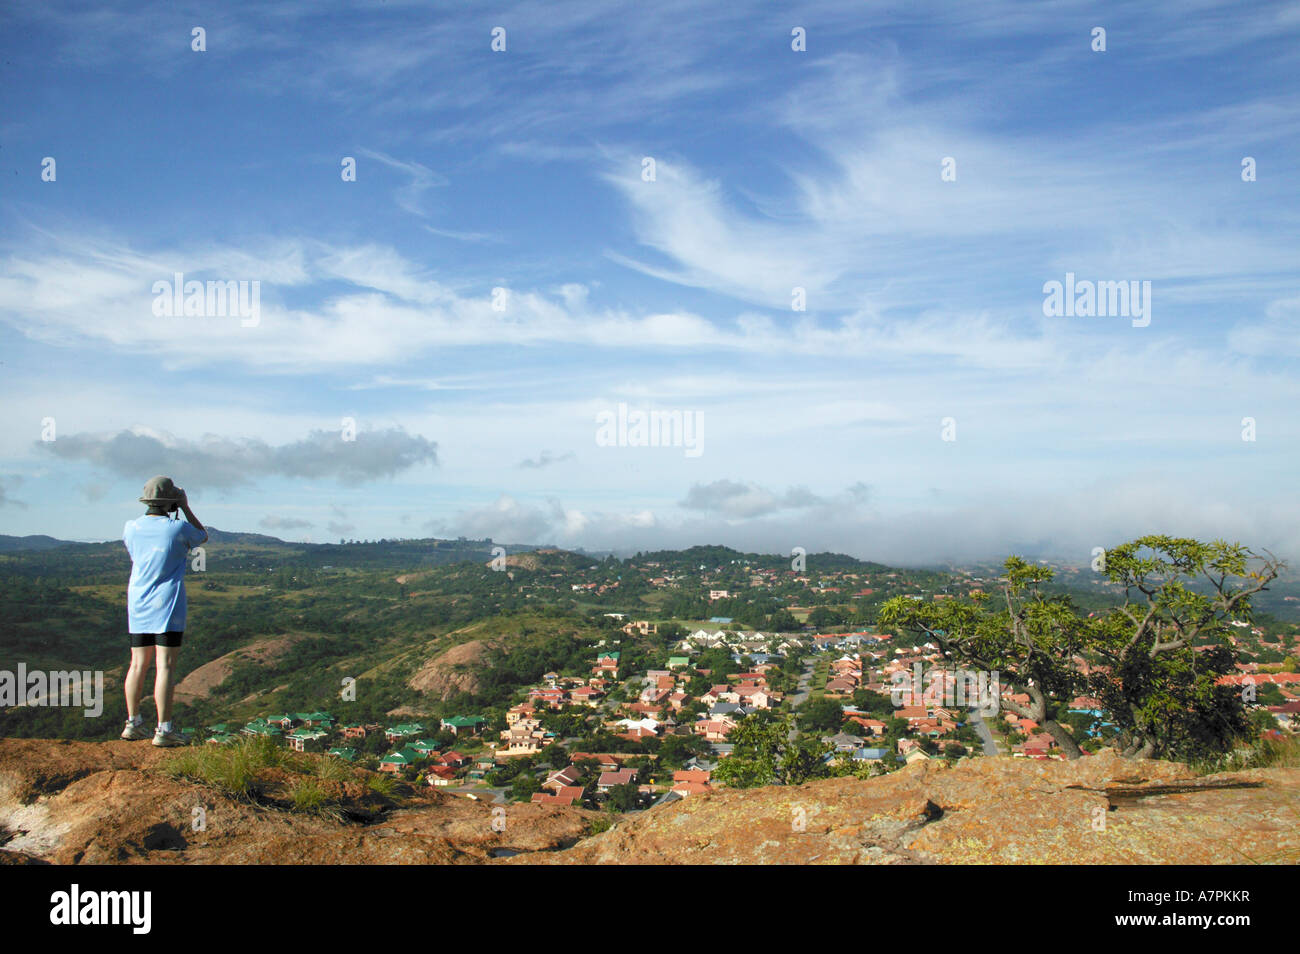 A person standing on the edge of a granite outcrop looking through binoculars towards a residential suburb in the valley below Stock Photo